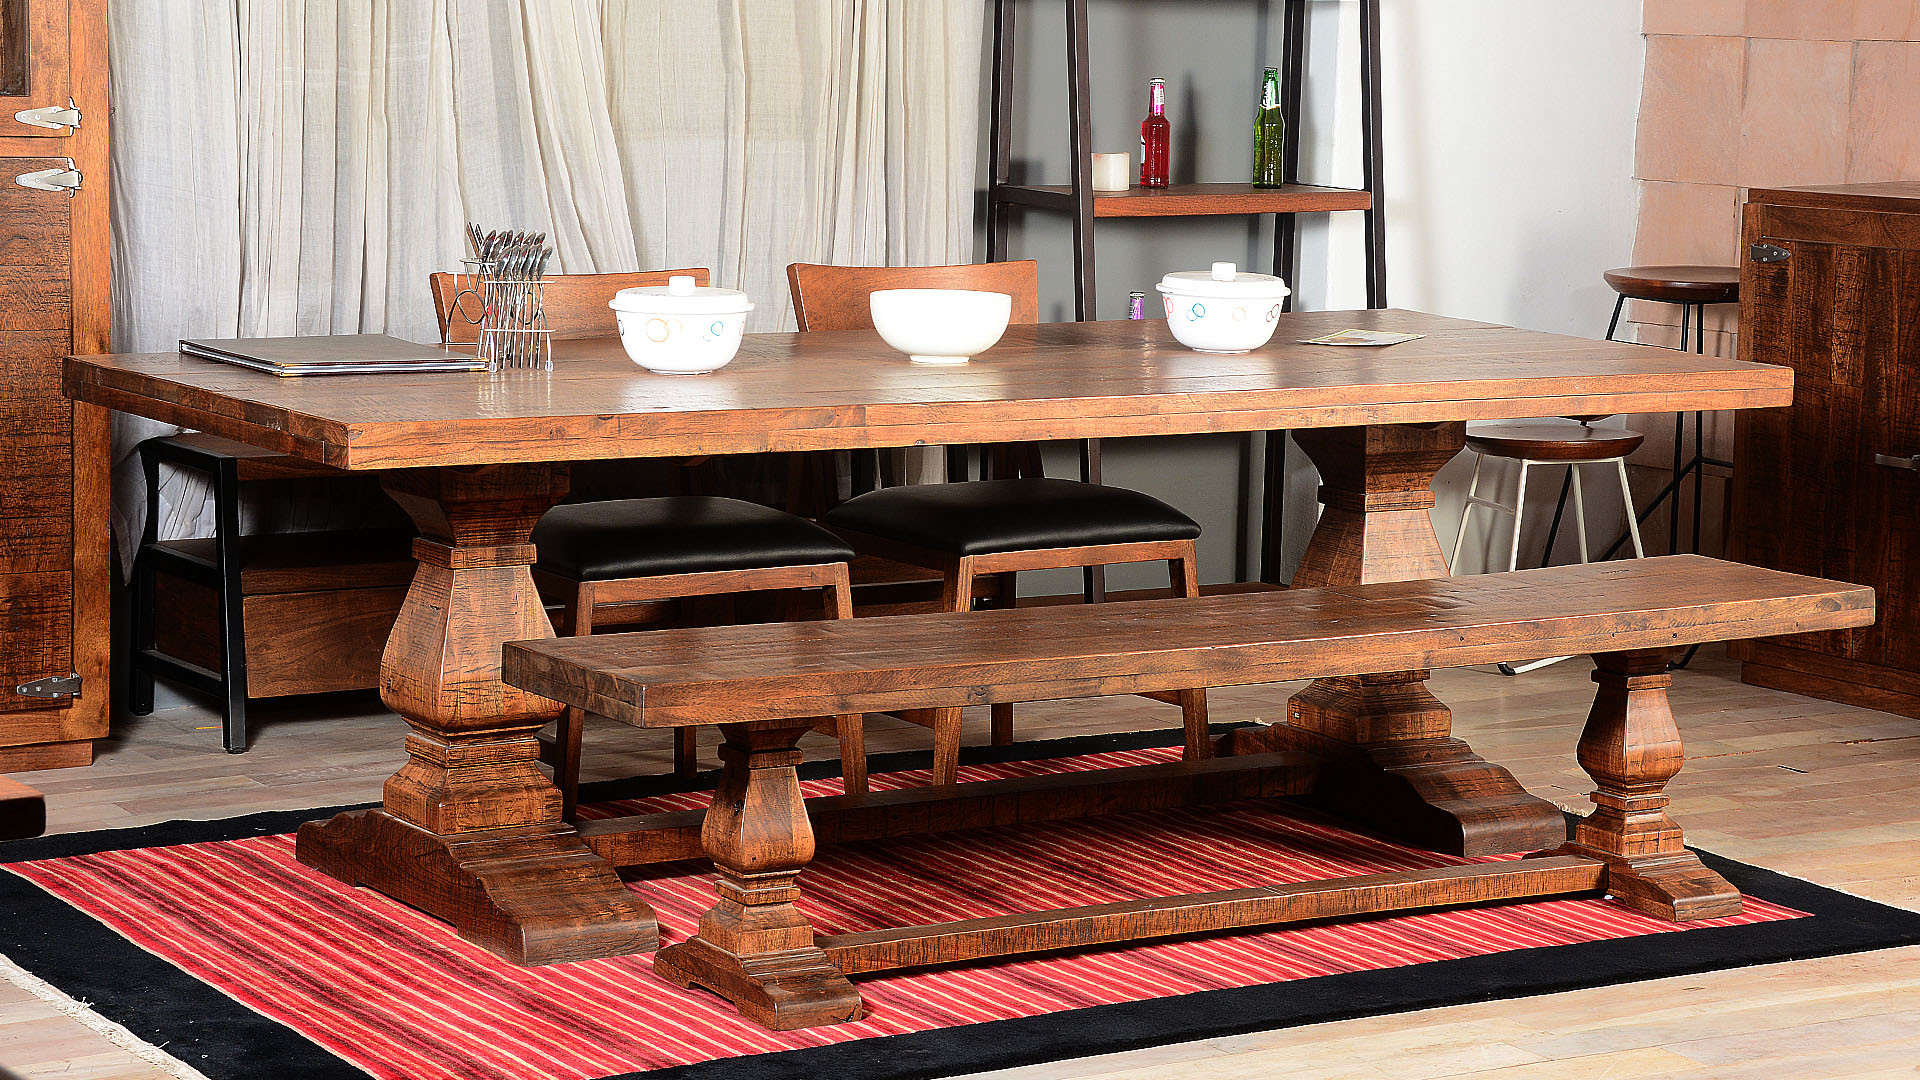 Farmhouse Trestle Traditional Rustic Dining Table Bench Rustic Dining Room San Francisco By Sierra Living Concepts Houzz